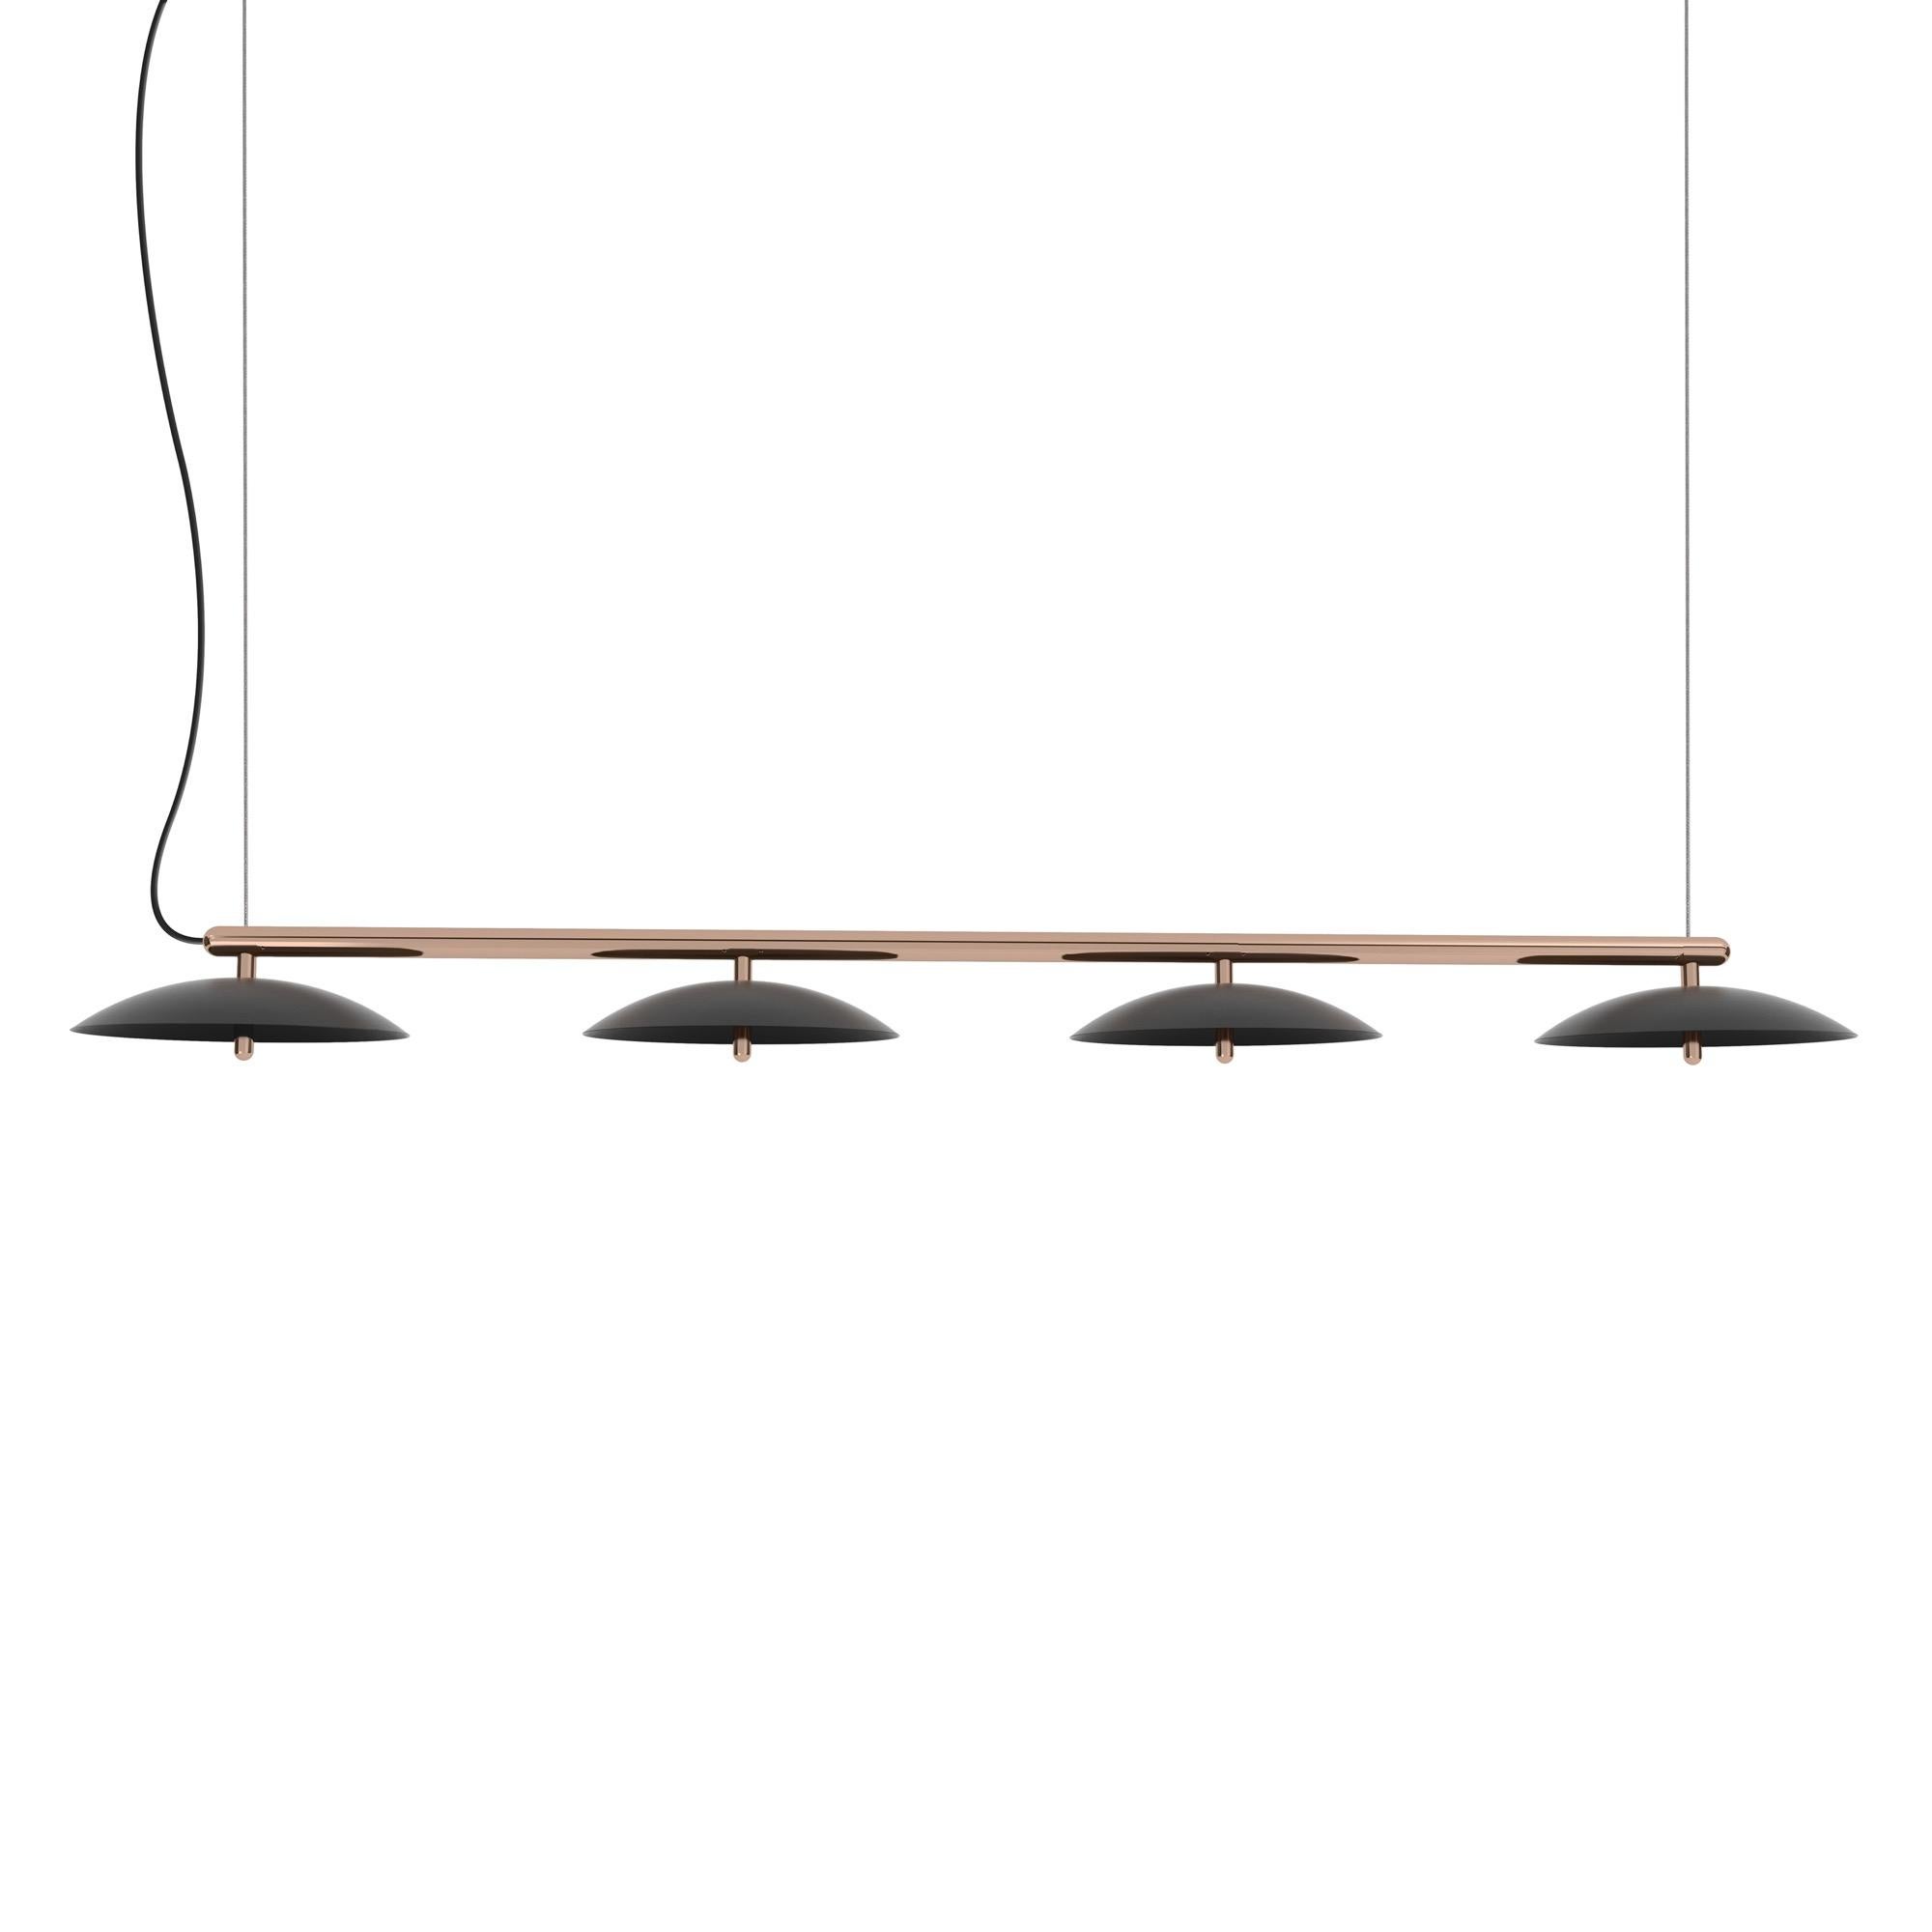 Perfect above a dining table or a conference table, the Signal Linear Pendant is a decidedly modern linear suspension light. A polished metal arm effortlessly supports spun metal shades that cast a downward glow through perforated diffusers. The